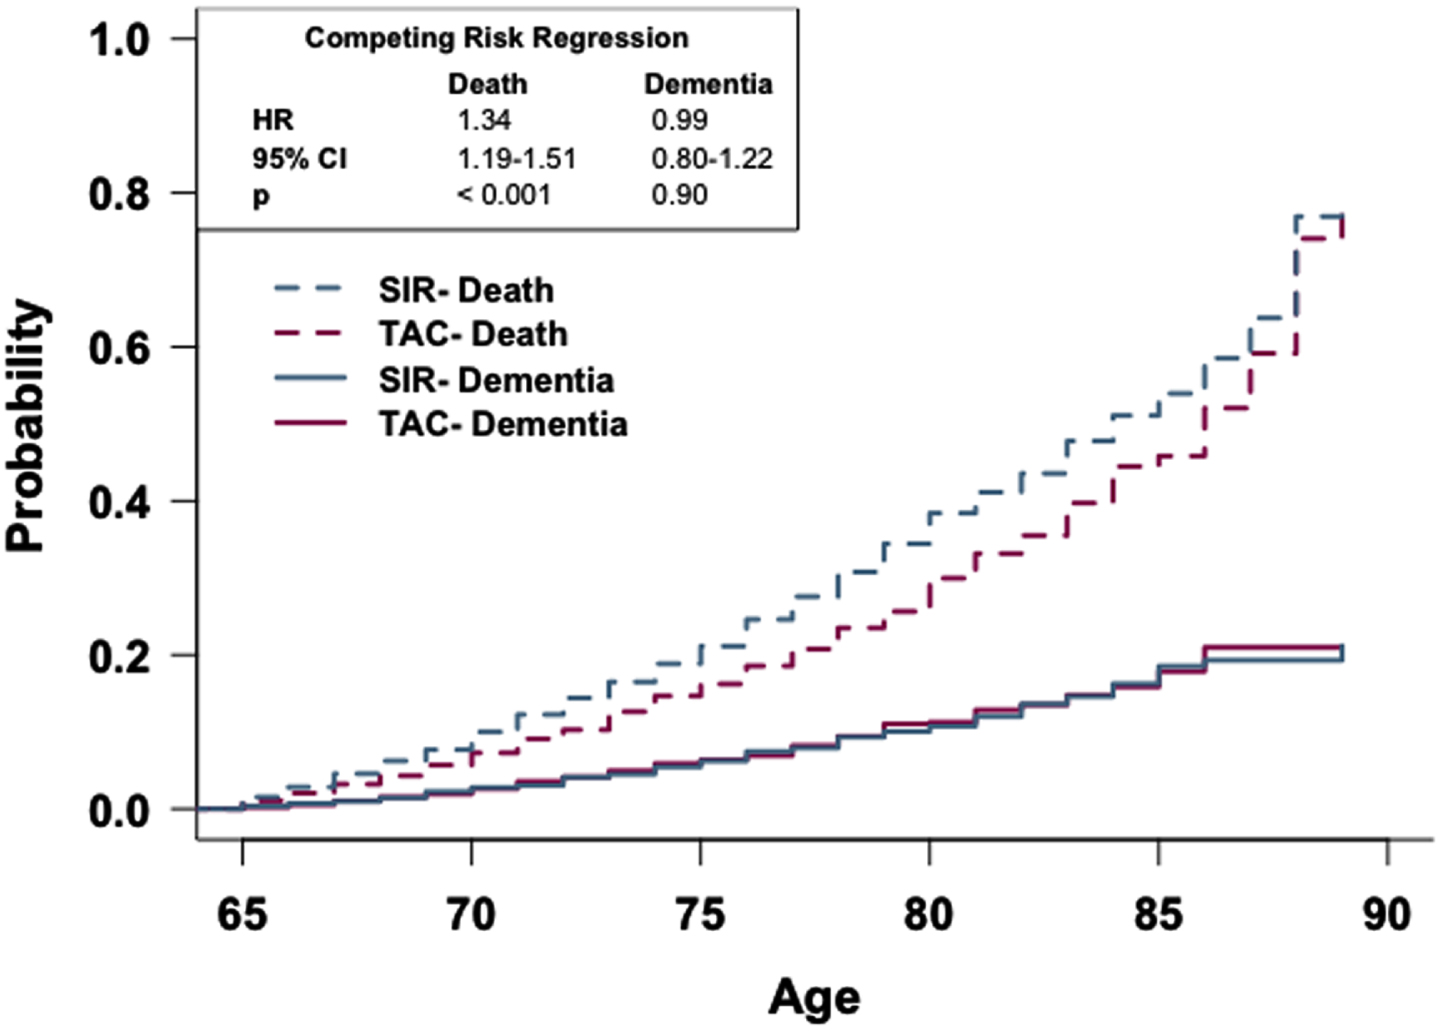 Patients prescribed sirolimus or tacrolimus show no difference in risk of dementia. Competing risk regression analysis of patients prescribed sirolimus or tacrolimus. There is no difference in dementia risk, but patients prescribed sirolimus have a higher risk of death. n = 2,928 patients/cohort. CRR, competing risk regression; HR, hazard ratio; CI, confidence interval.